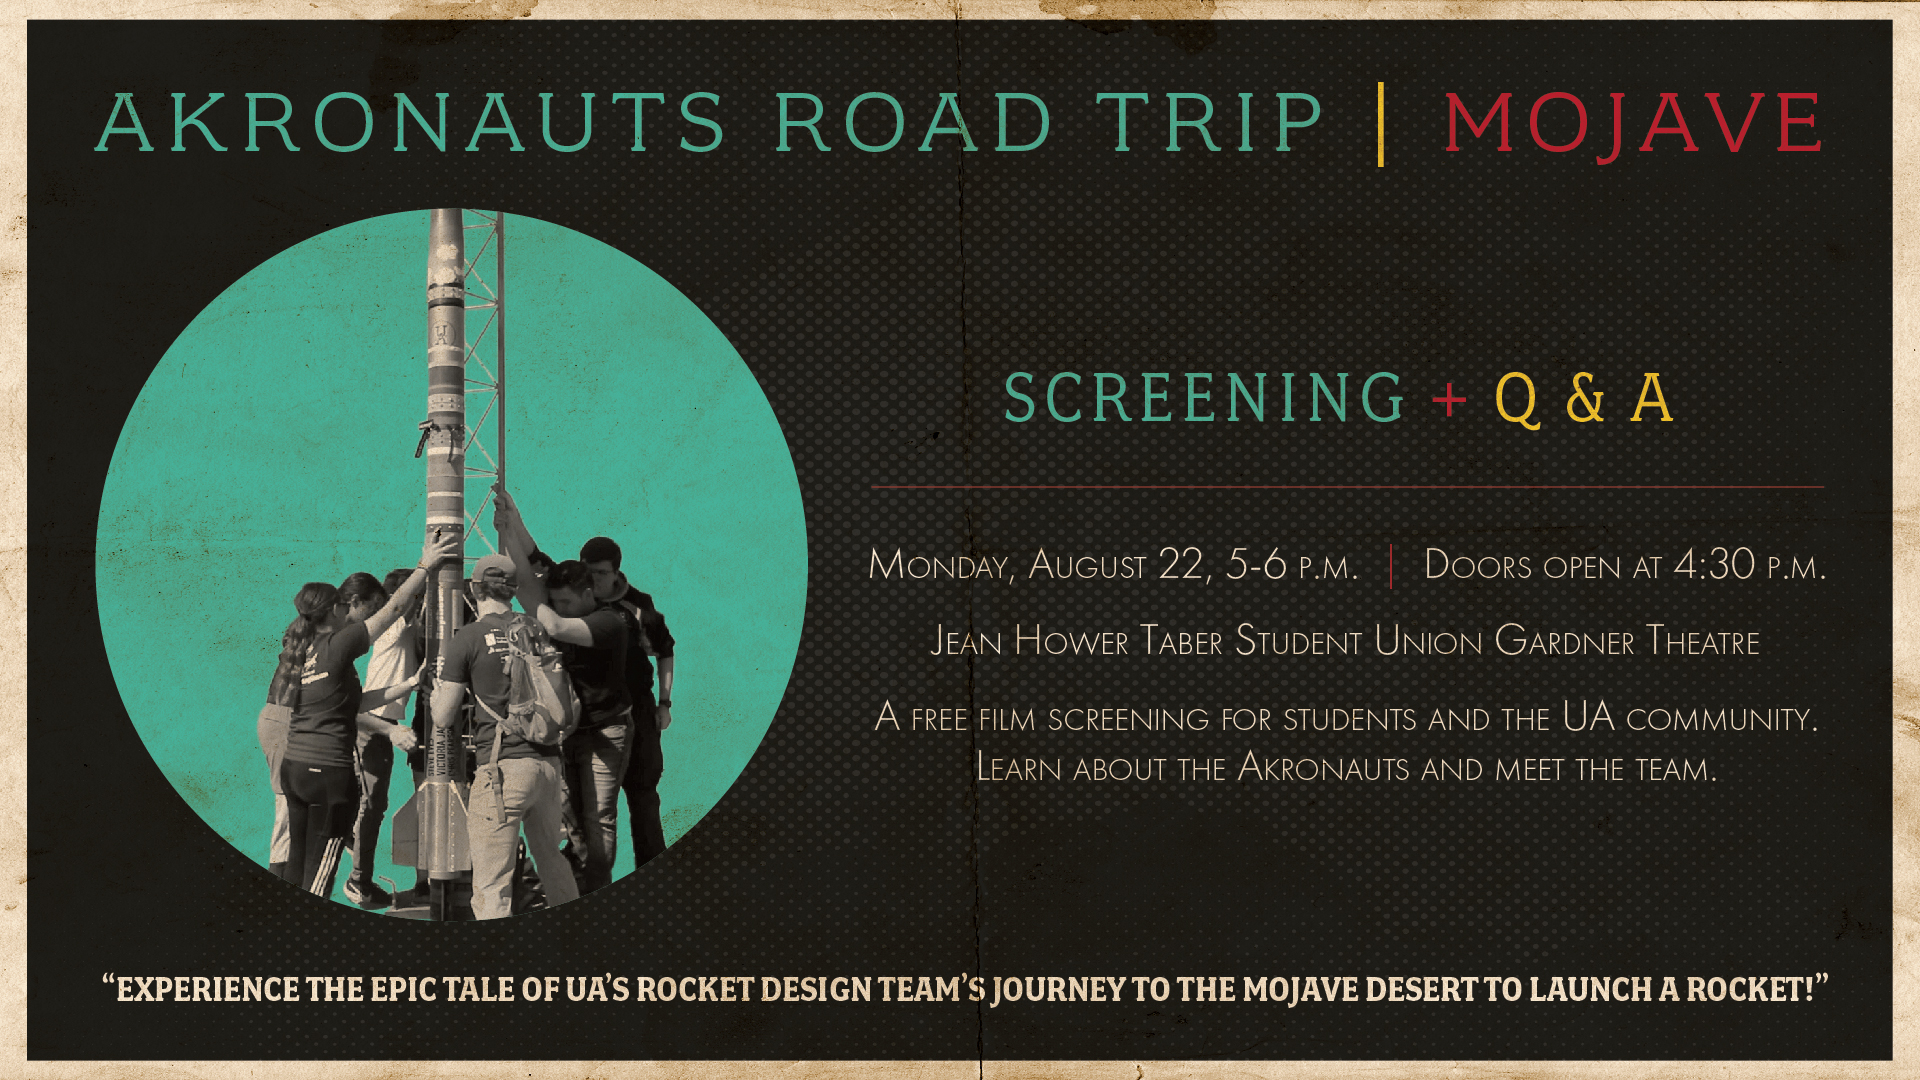 On Monday, August 22, the Akronauts hosted a screening of the film during UA’s Weeks of Welcome event series in the Jean Hower Taber Student Union Theater.